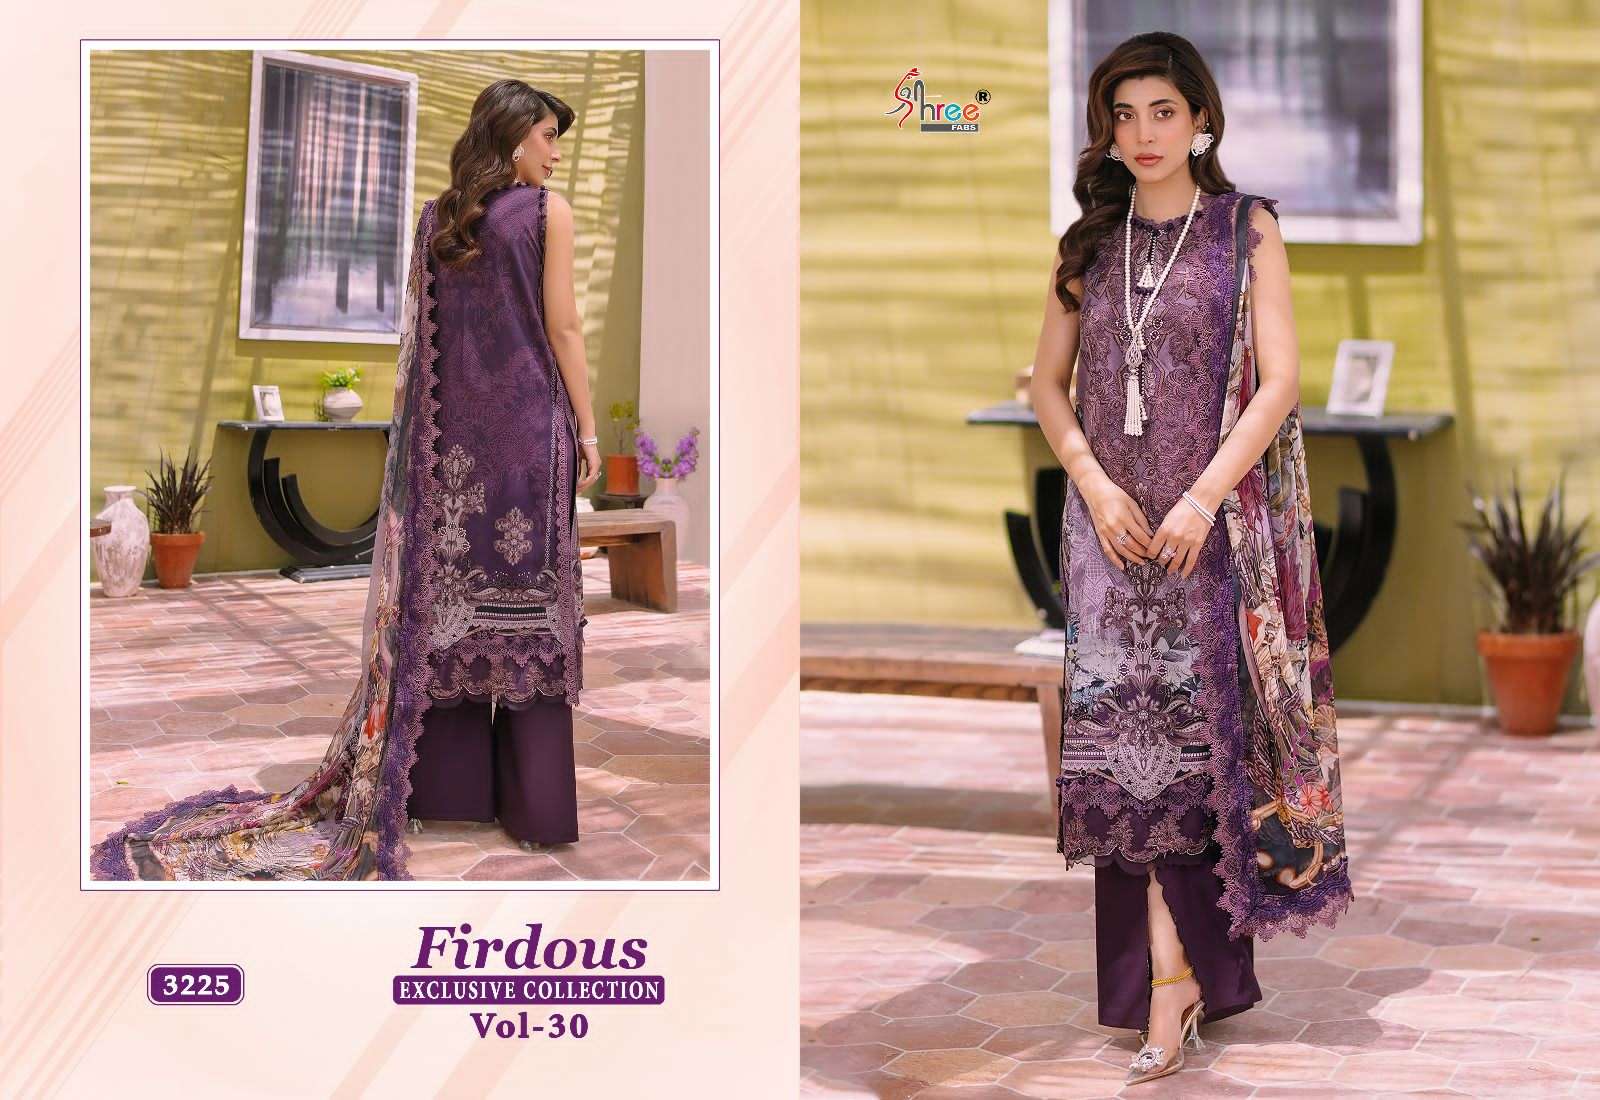 firdous exclusive collection vol-30 by shree fabs 3219-3226 series pakistani salwar kameez wholesale price